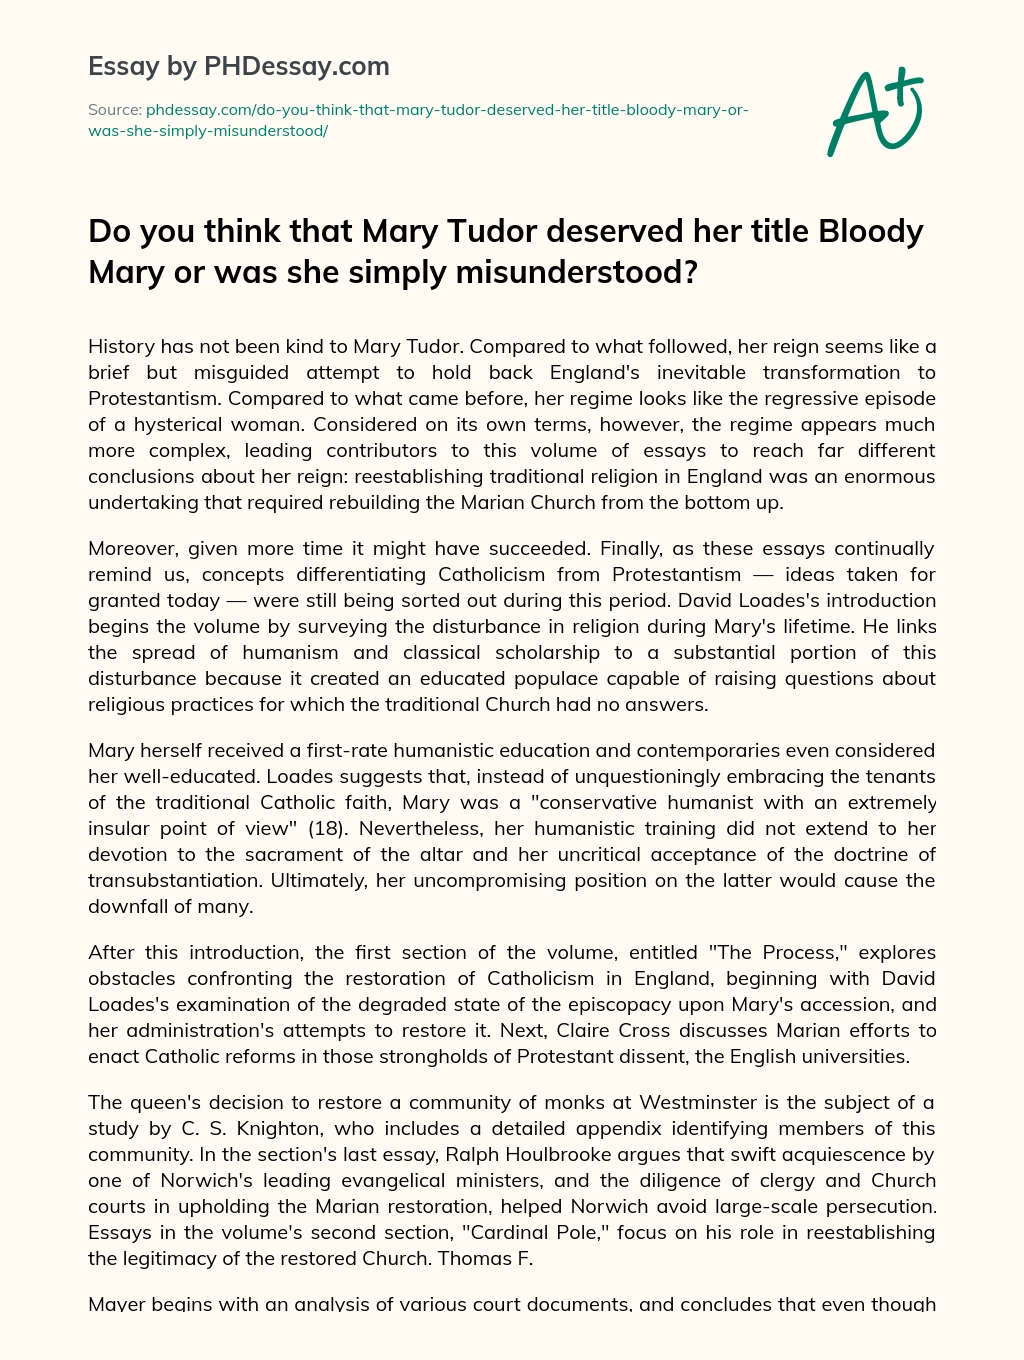 Do you think that Mary Tudor deserved her title Bloody Mary or was she simply misunderstood? essay